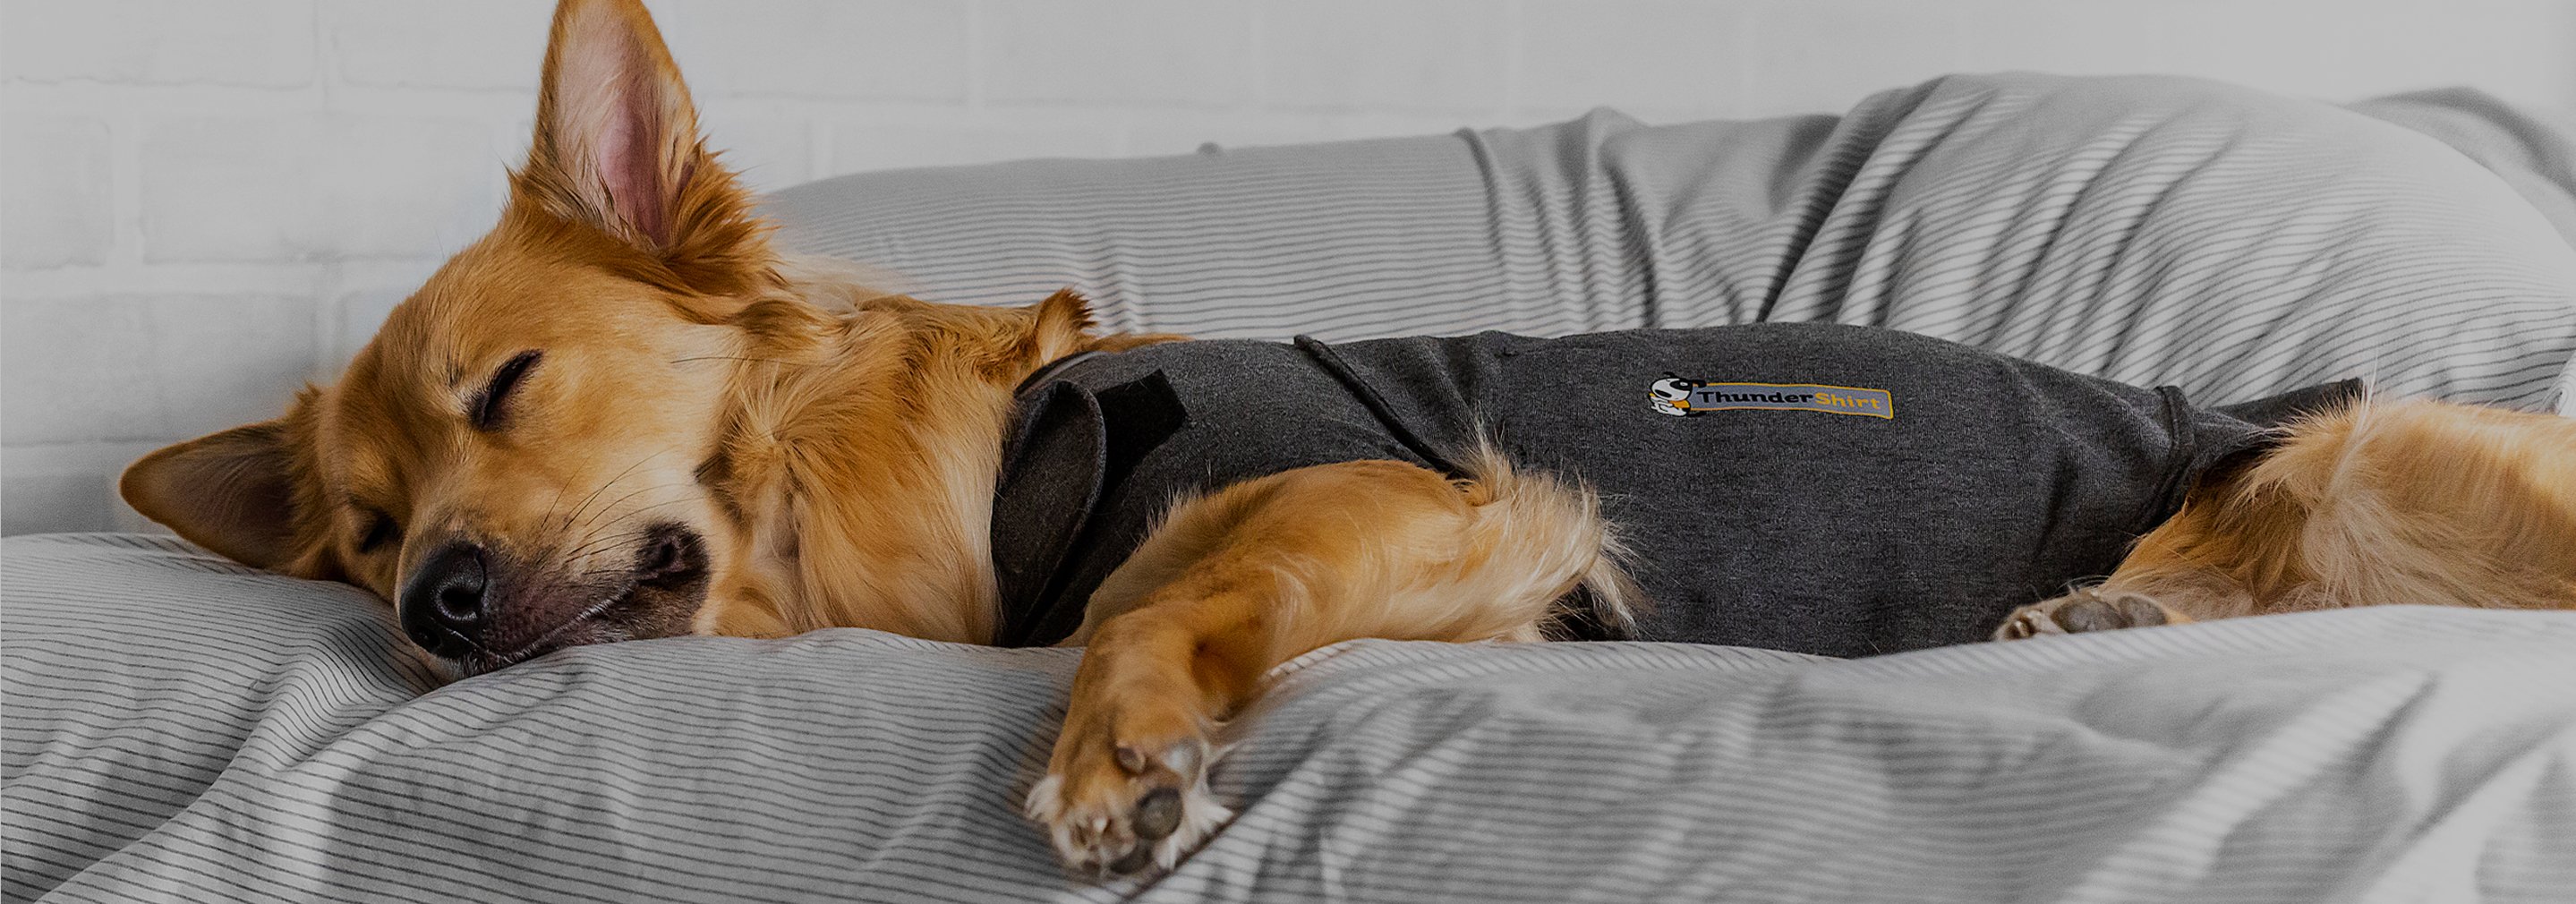 Do ThunderShirts Work? We Ask the Experts and Put Them to the Test